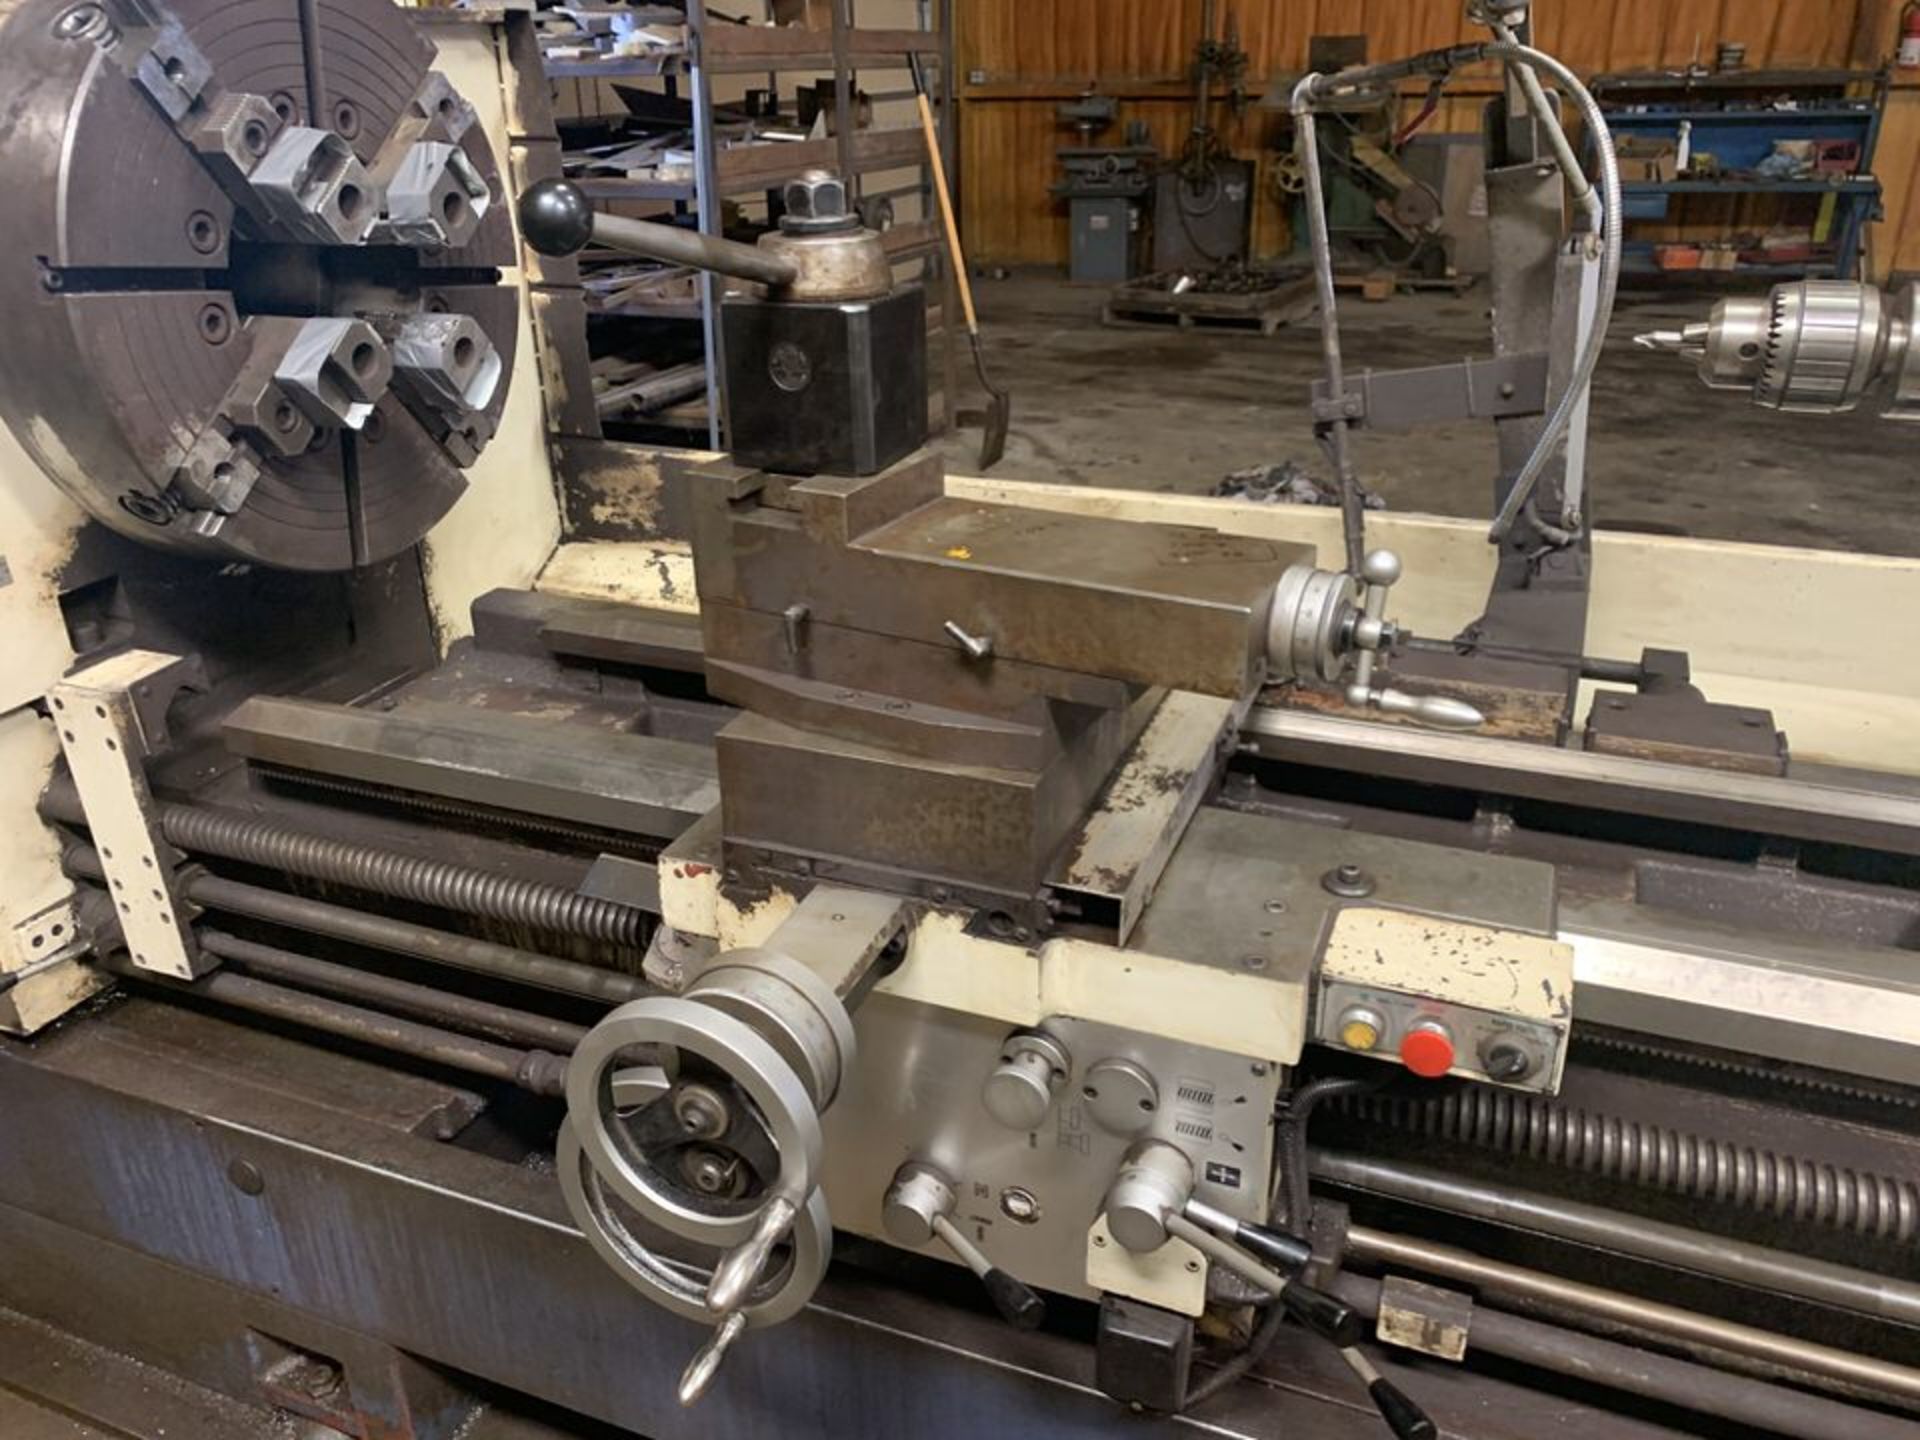 SUMMIT ENGINE LATHE, MDL: 33X9X160, APPROX 24" SWING X 160" CENTERS, - Image 7 of 11